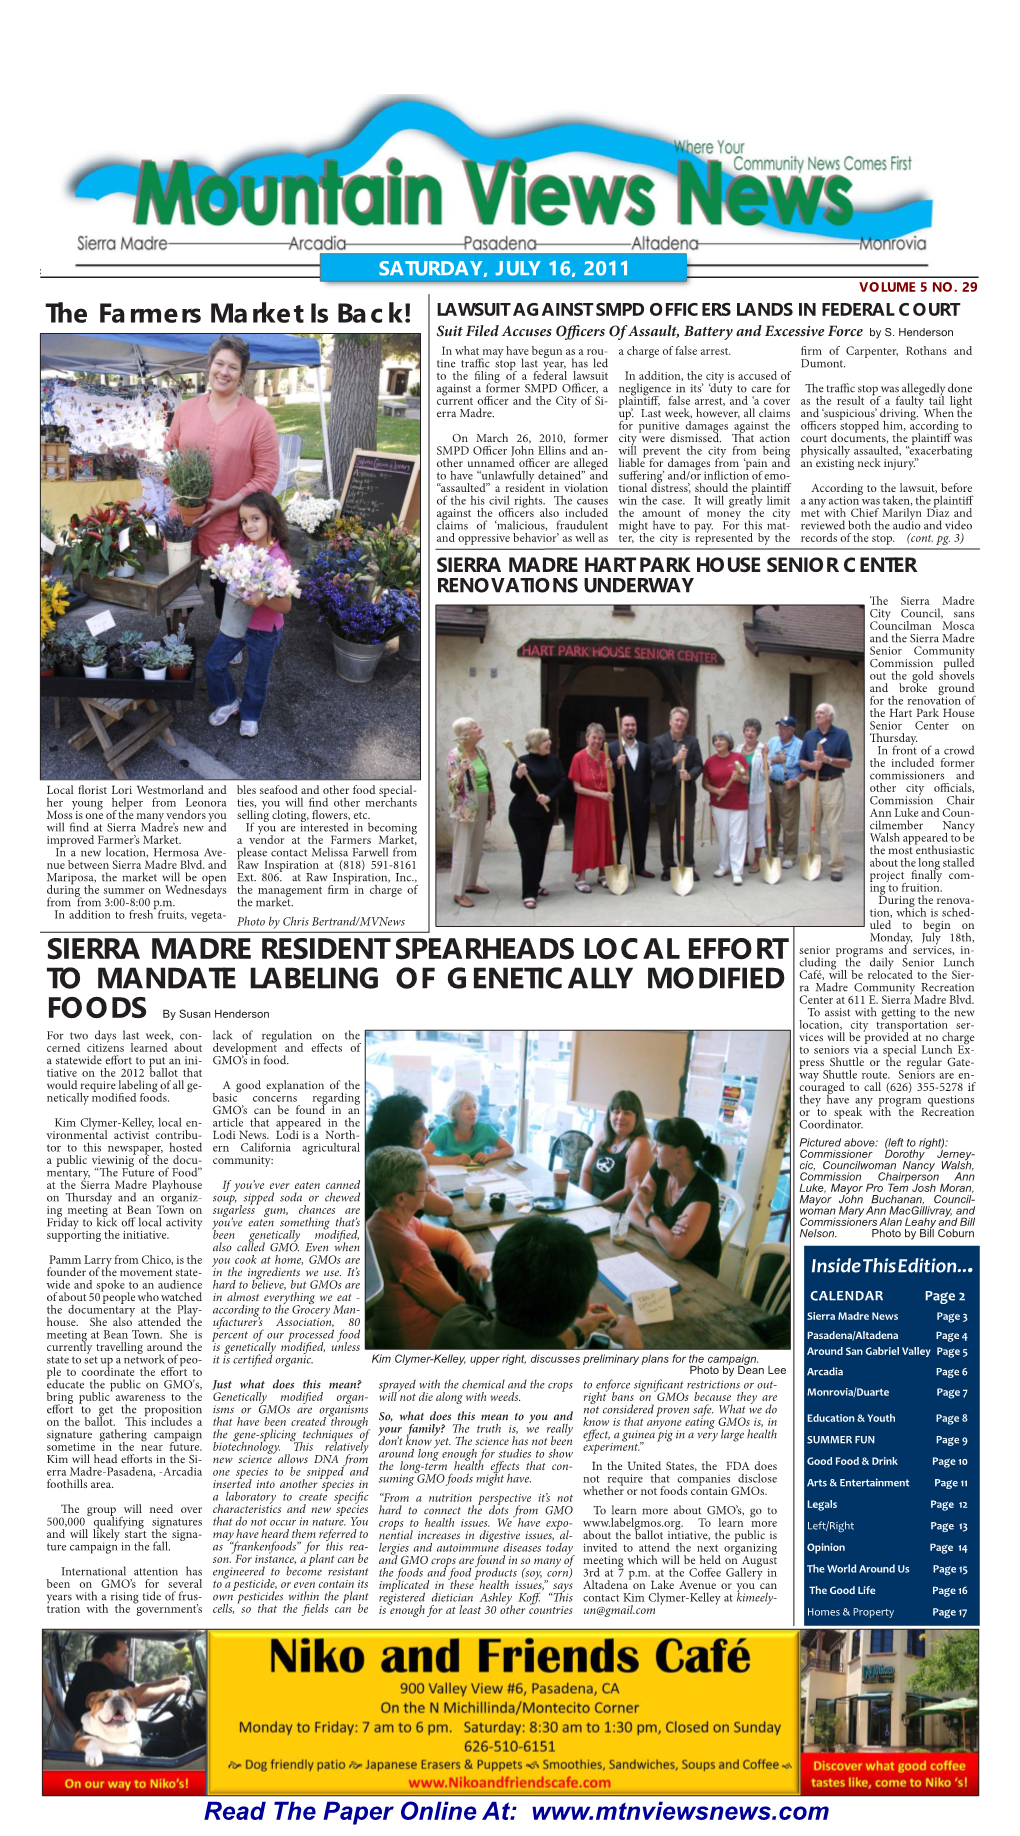 Sierra Madre Resident Spearheads Local Effort To